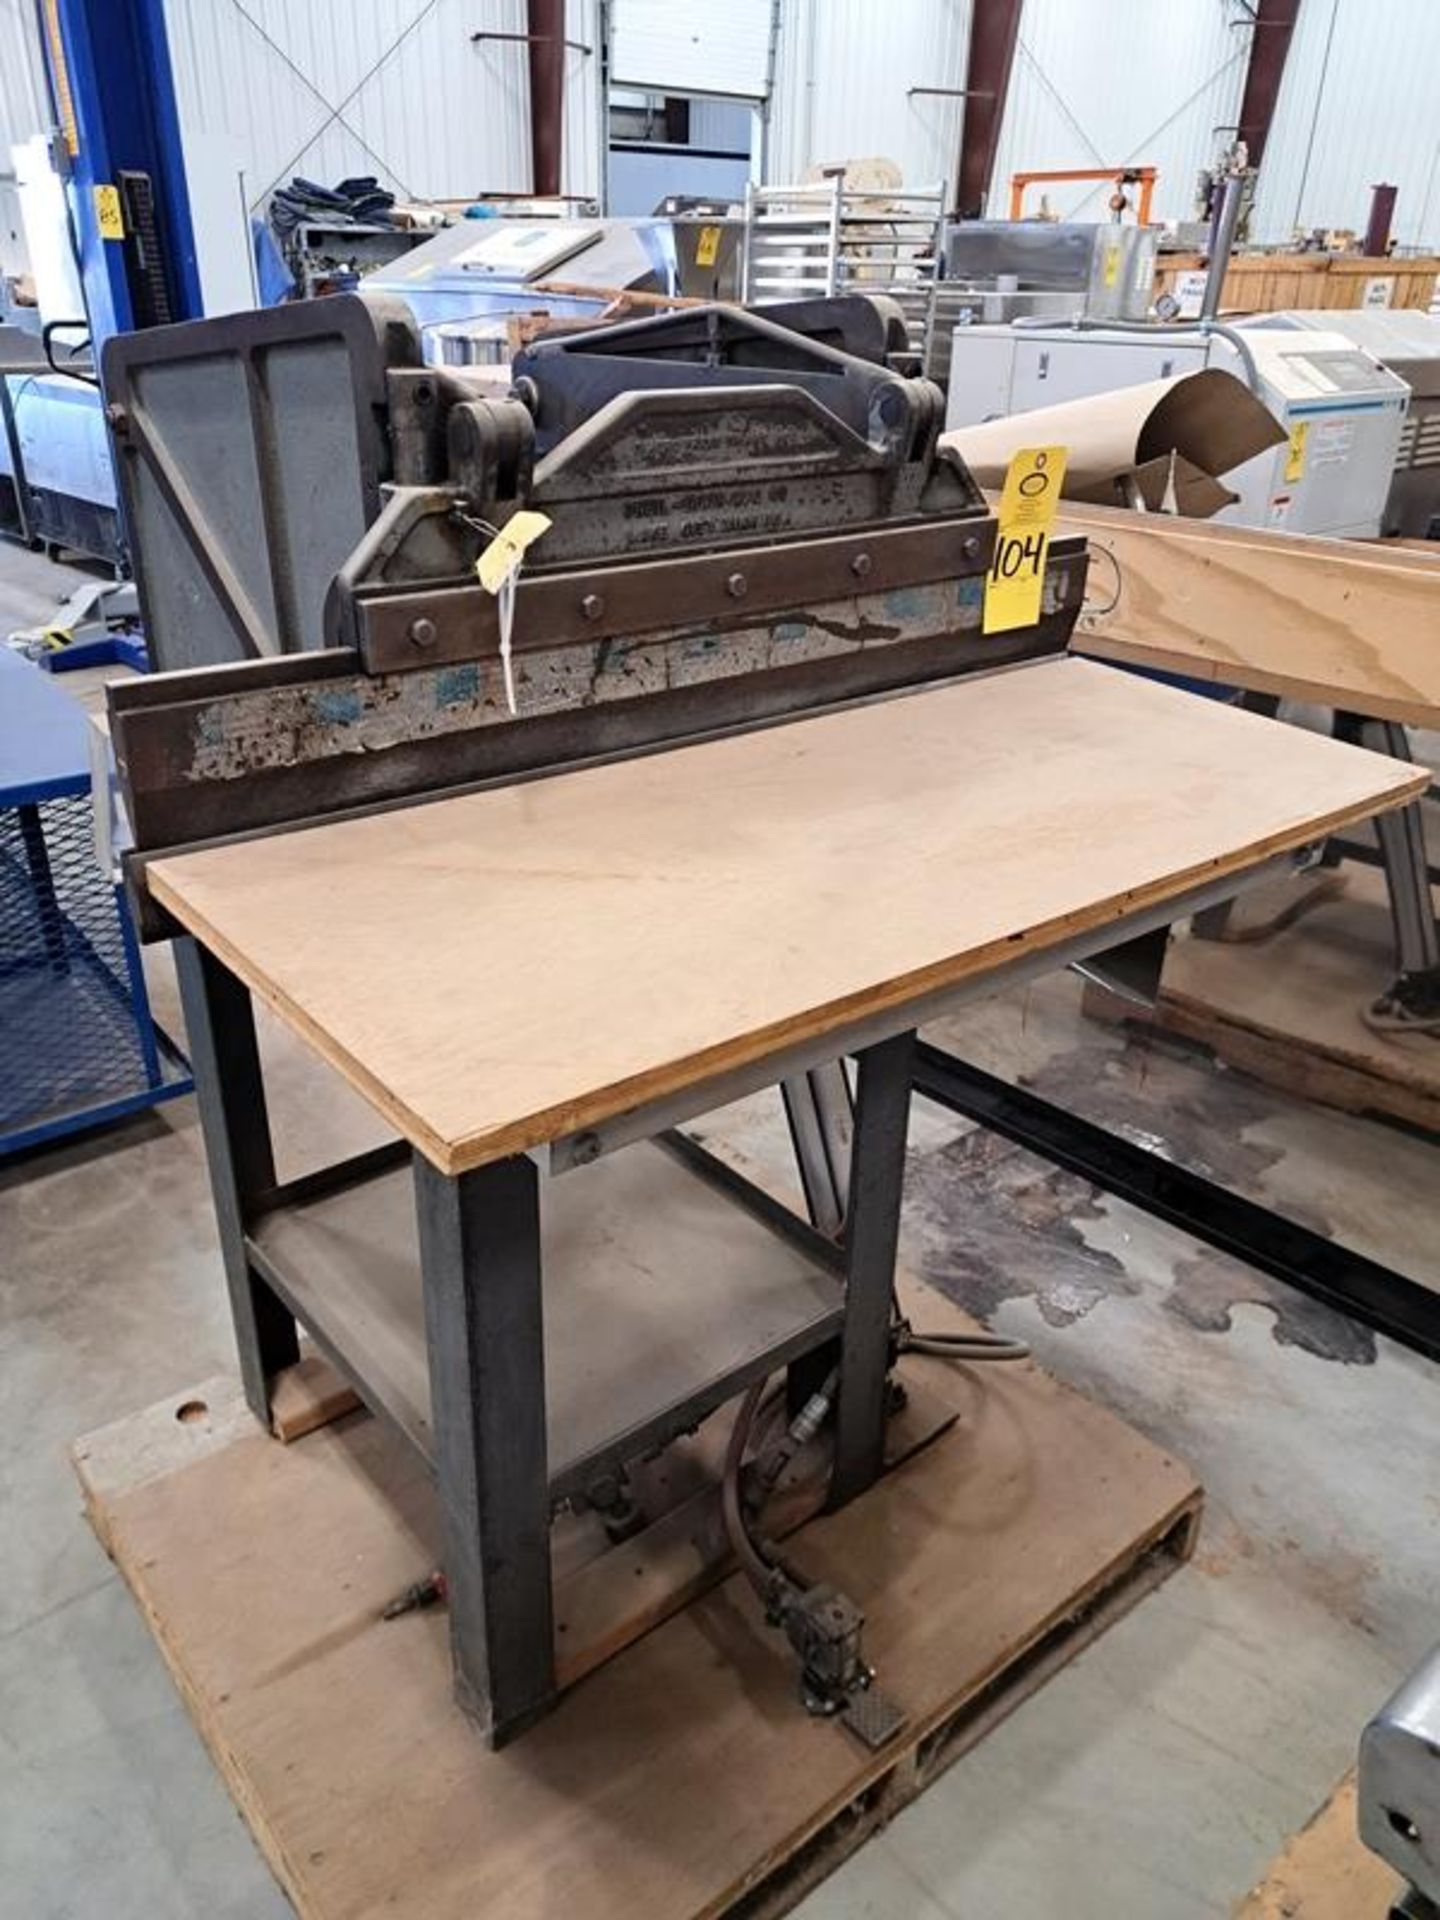 Di-Arco Press Brake, 36" wide, Ser. #1553 (Required Loading Fee: $25.00) NO HAND CARRY (Price Is For